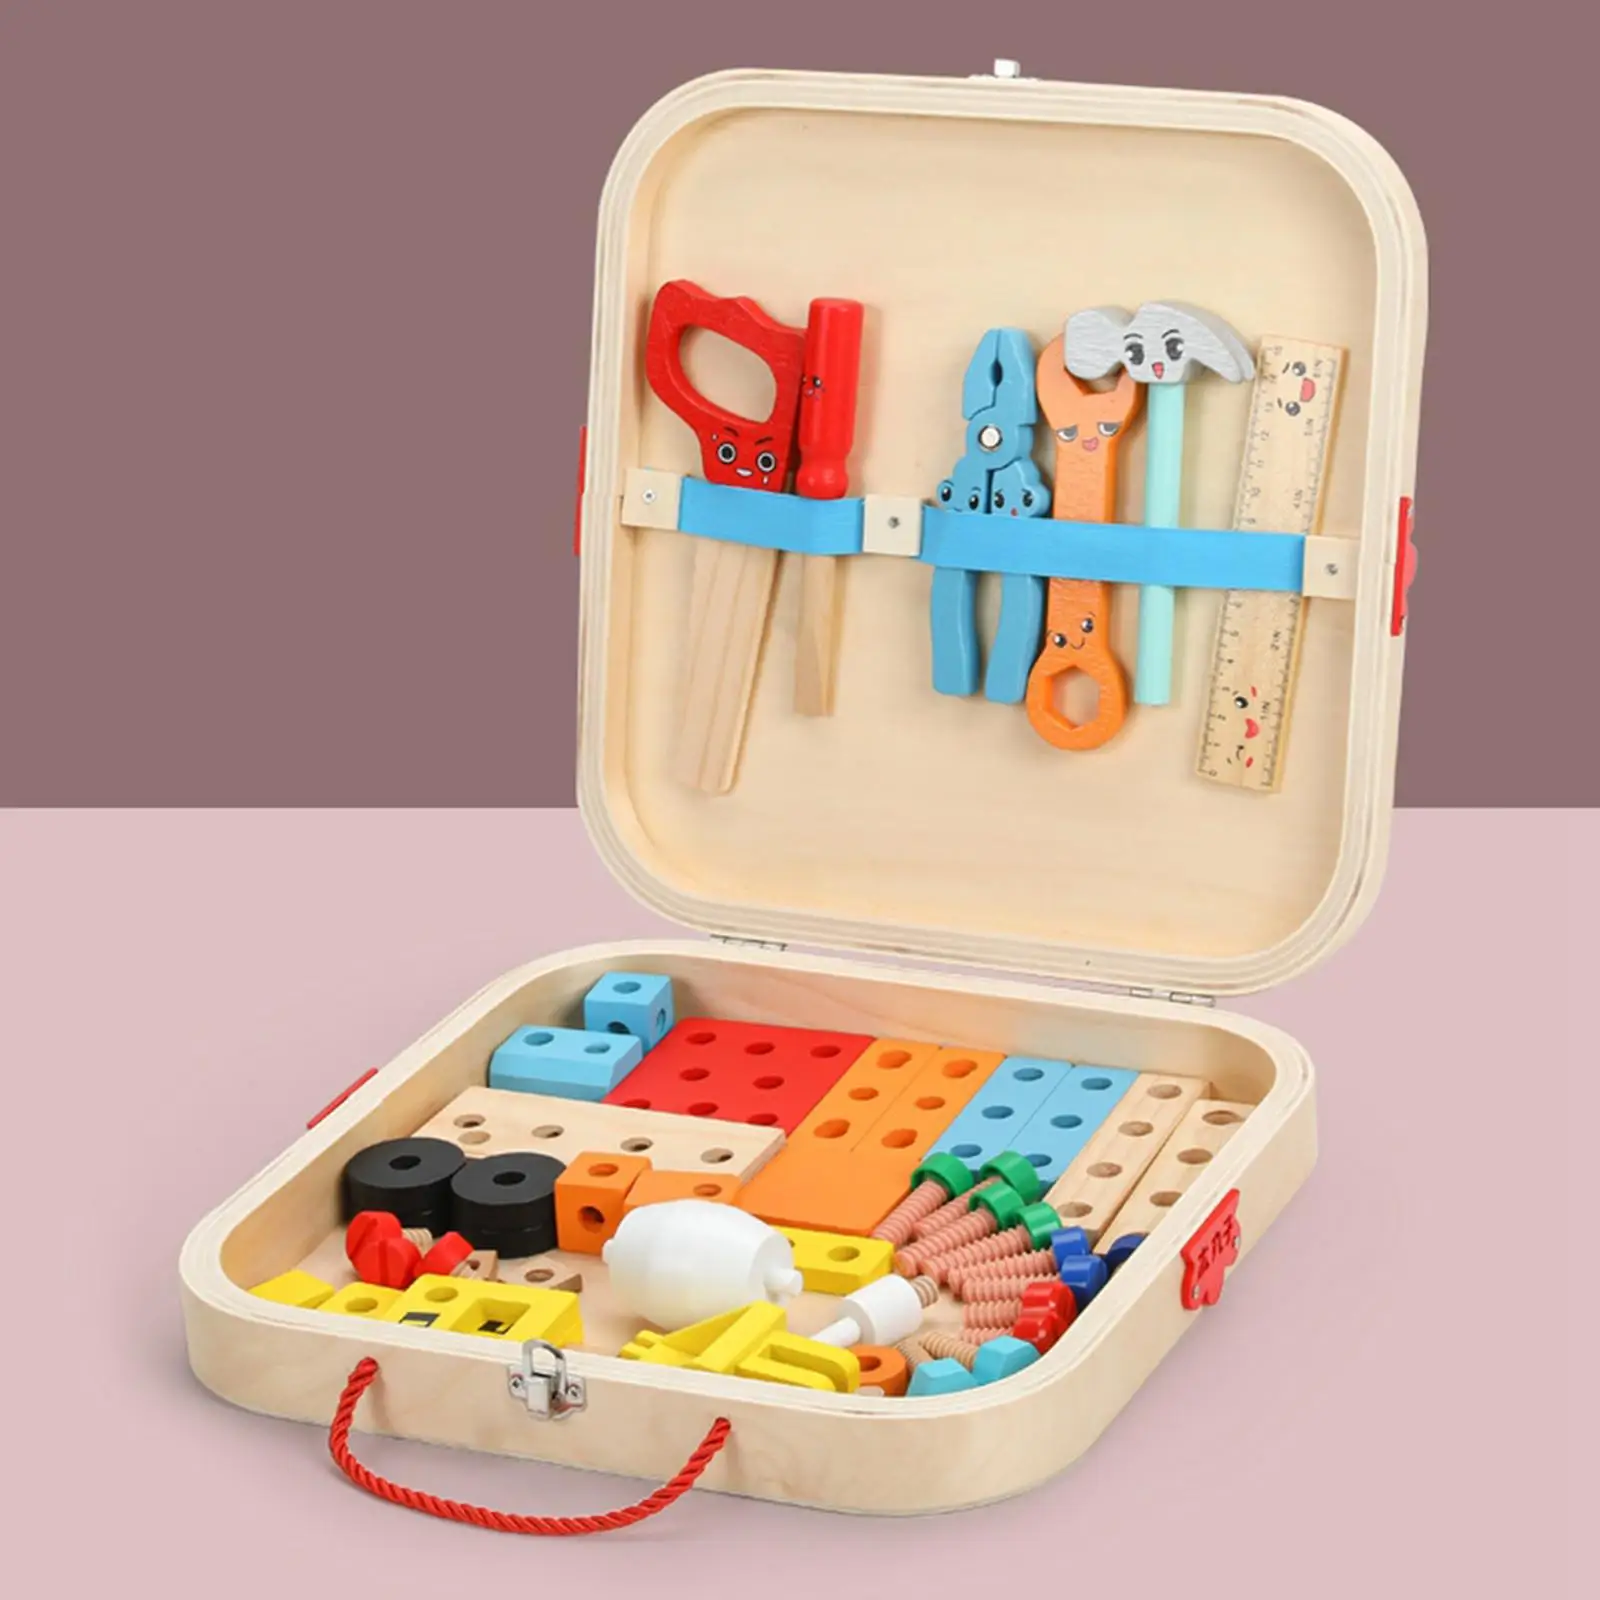 Wooden Kid Tool Set for Toddlers Fine Motor Skill Toddlers Wooden Tool Toy with Tool Box 2 3 4 5 6 Year Old Boys Girls Baby